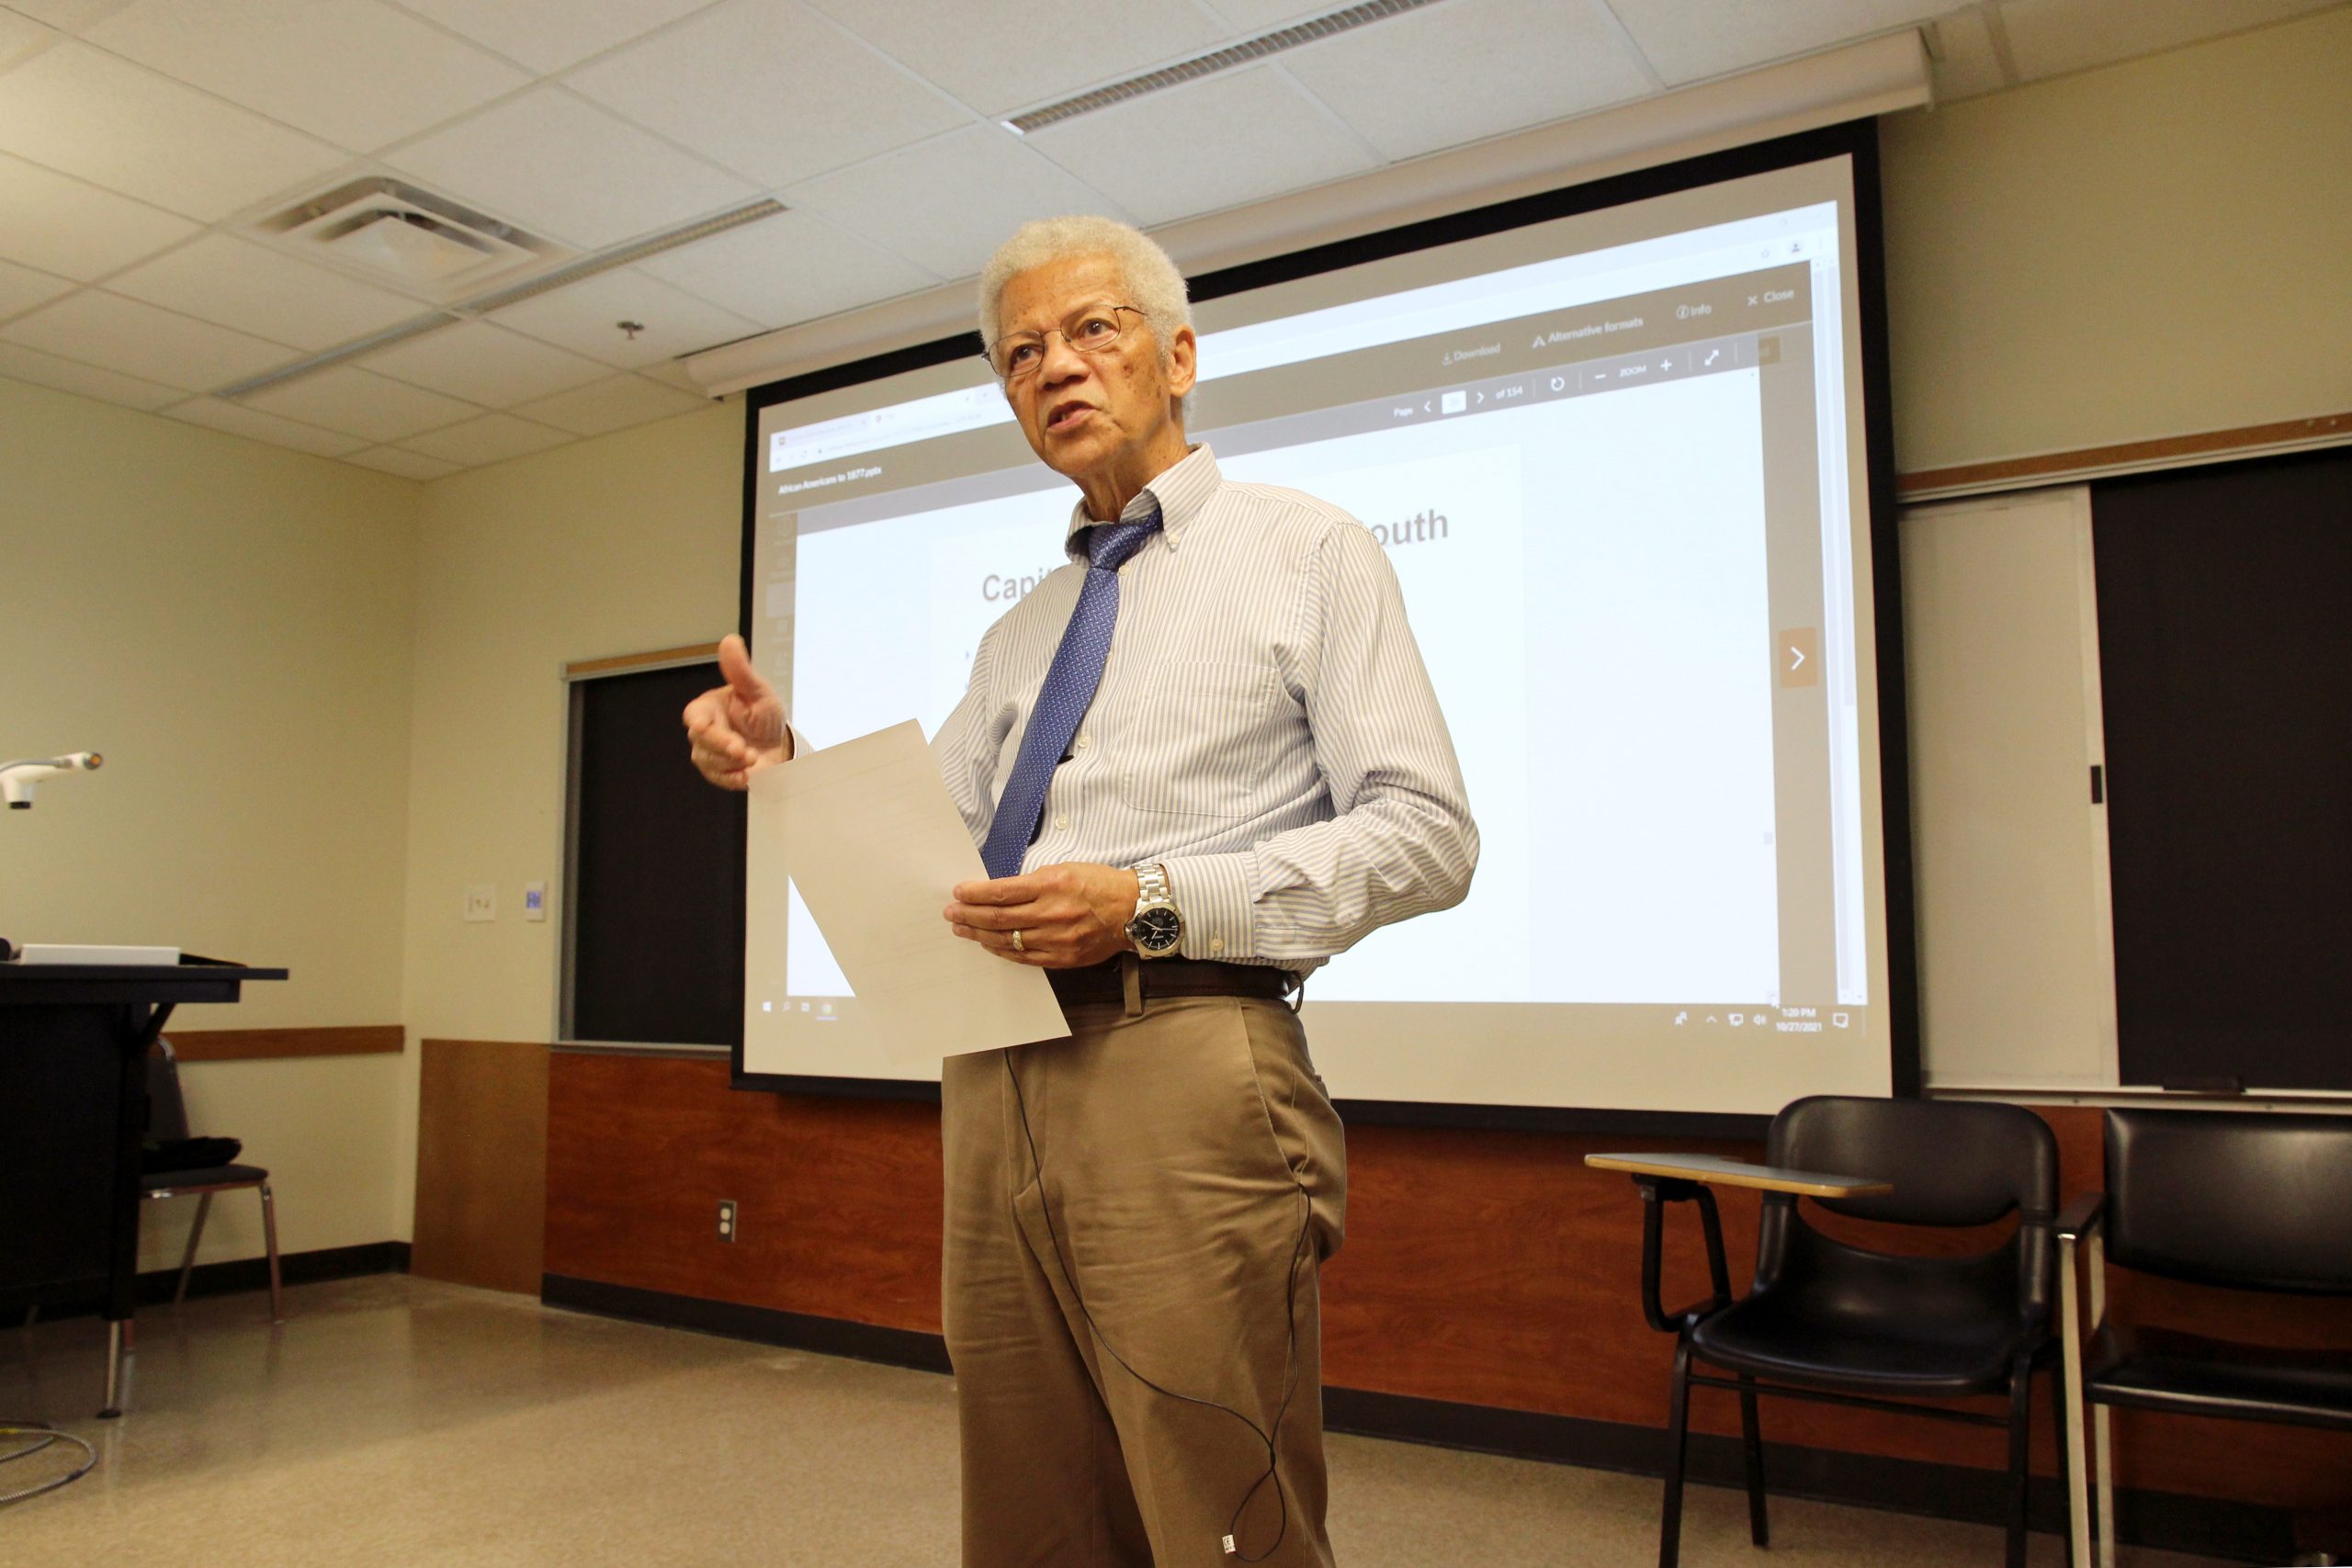 Broussard lectures students on campus.